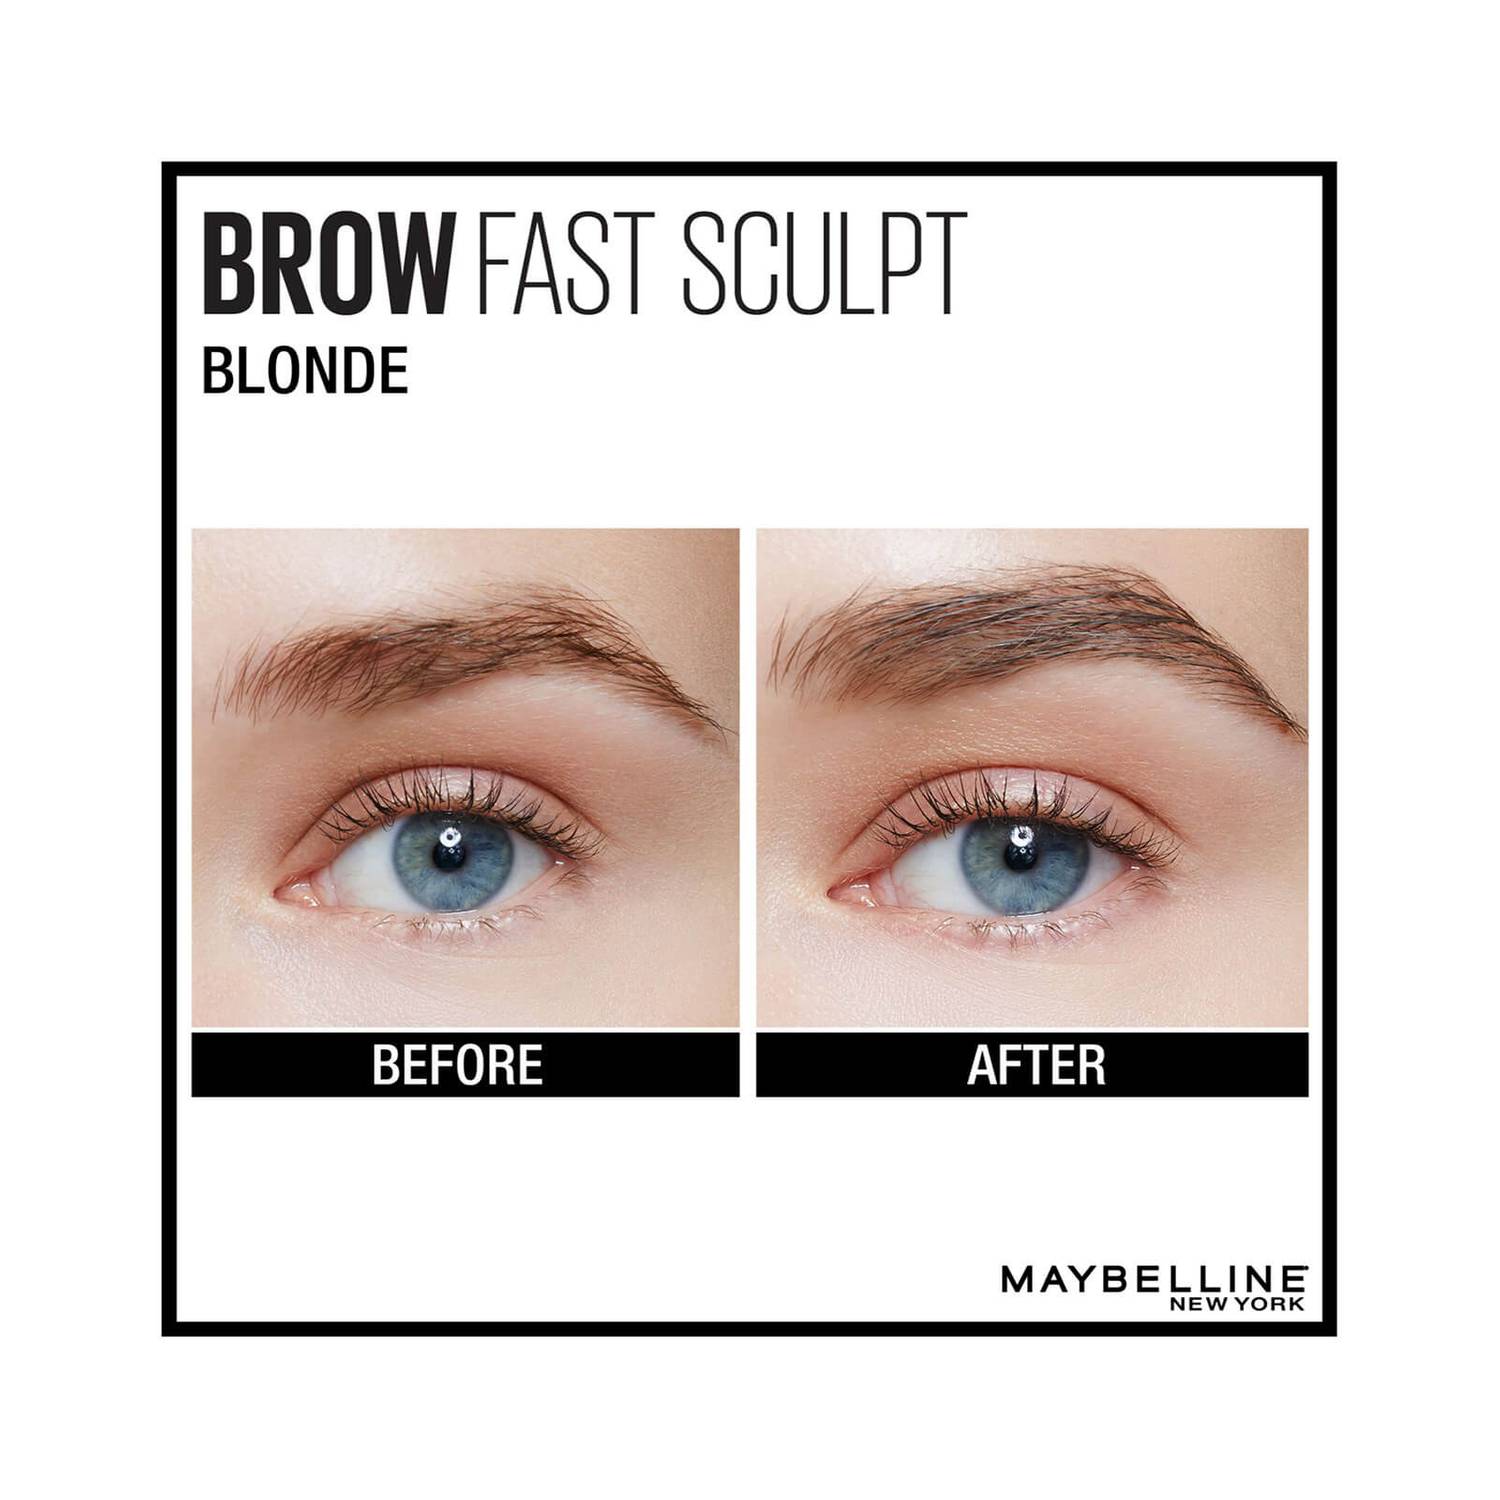 Maybelline Brow Fast Sculpt - Give Us Beauty